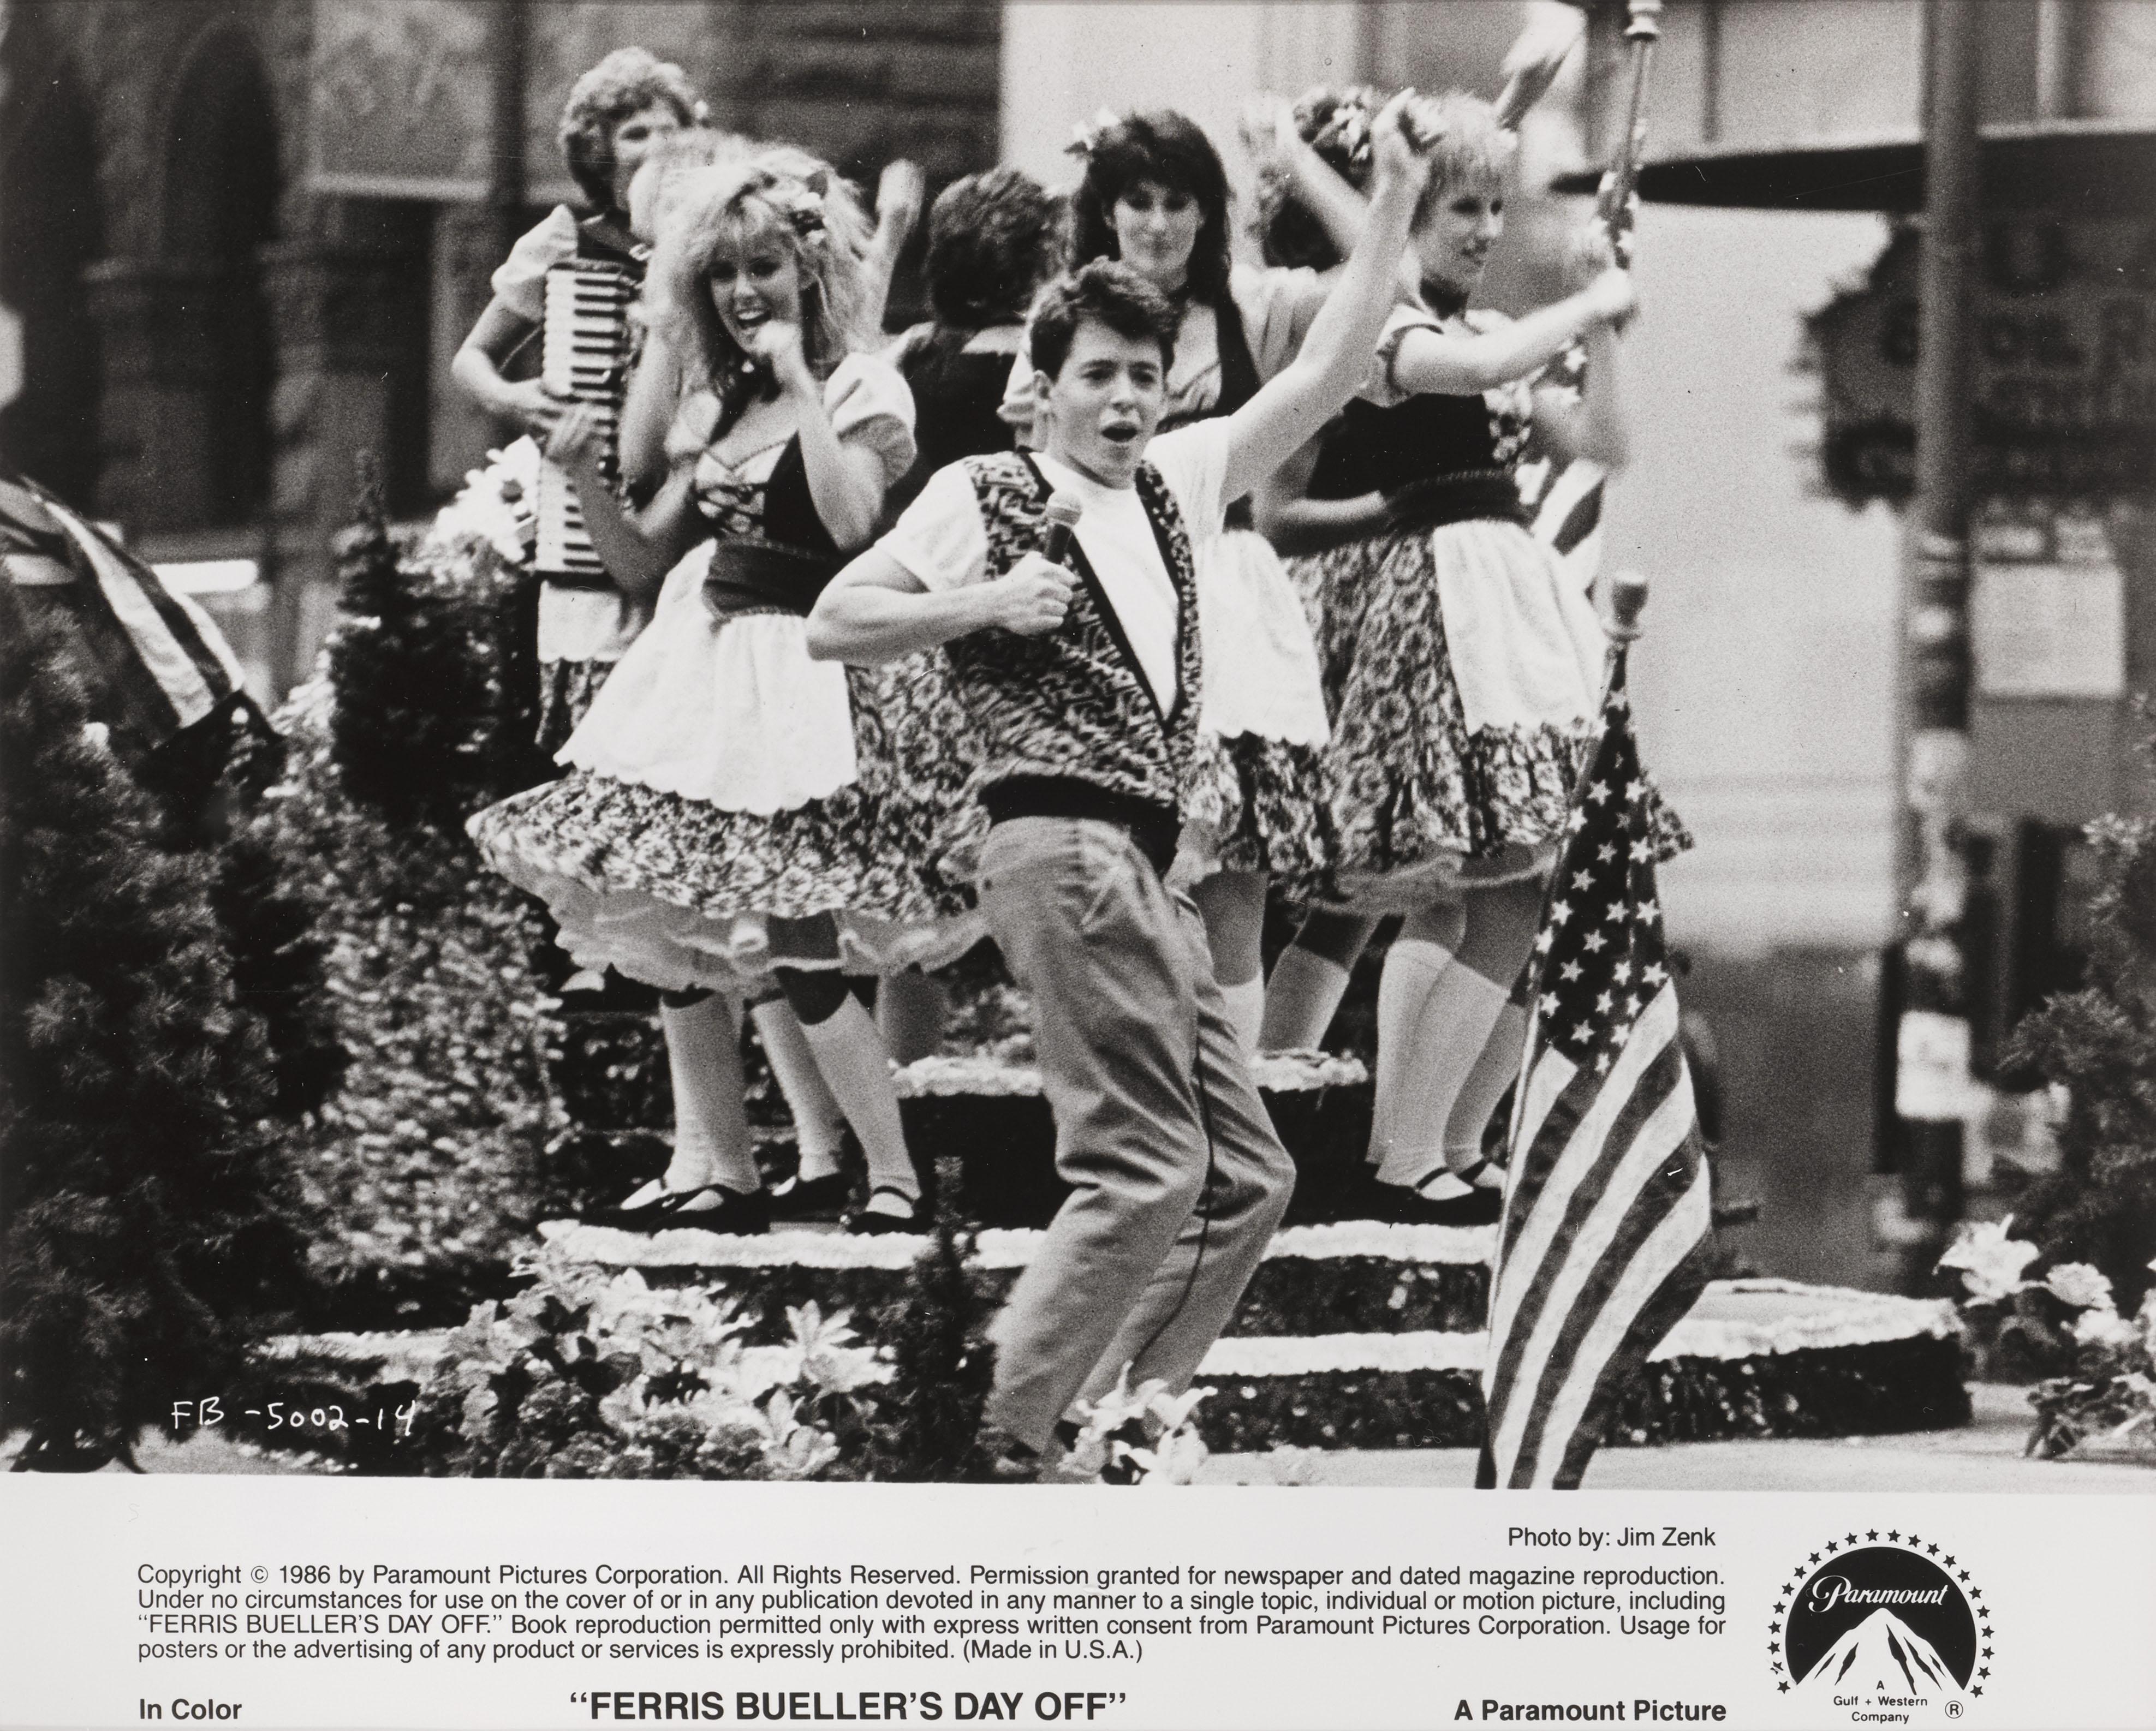 Original photographic production still for the wonderful 1986 comedy staring
Matthew Broderick, Alan Ruck, Mia Sara. This 80s film has become a true cult classic teen coming-of-age film.
On the reverse of the piece is some original info sent out